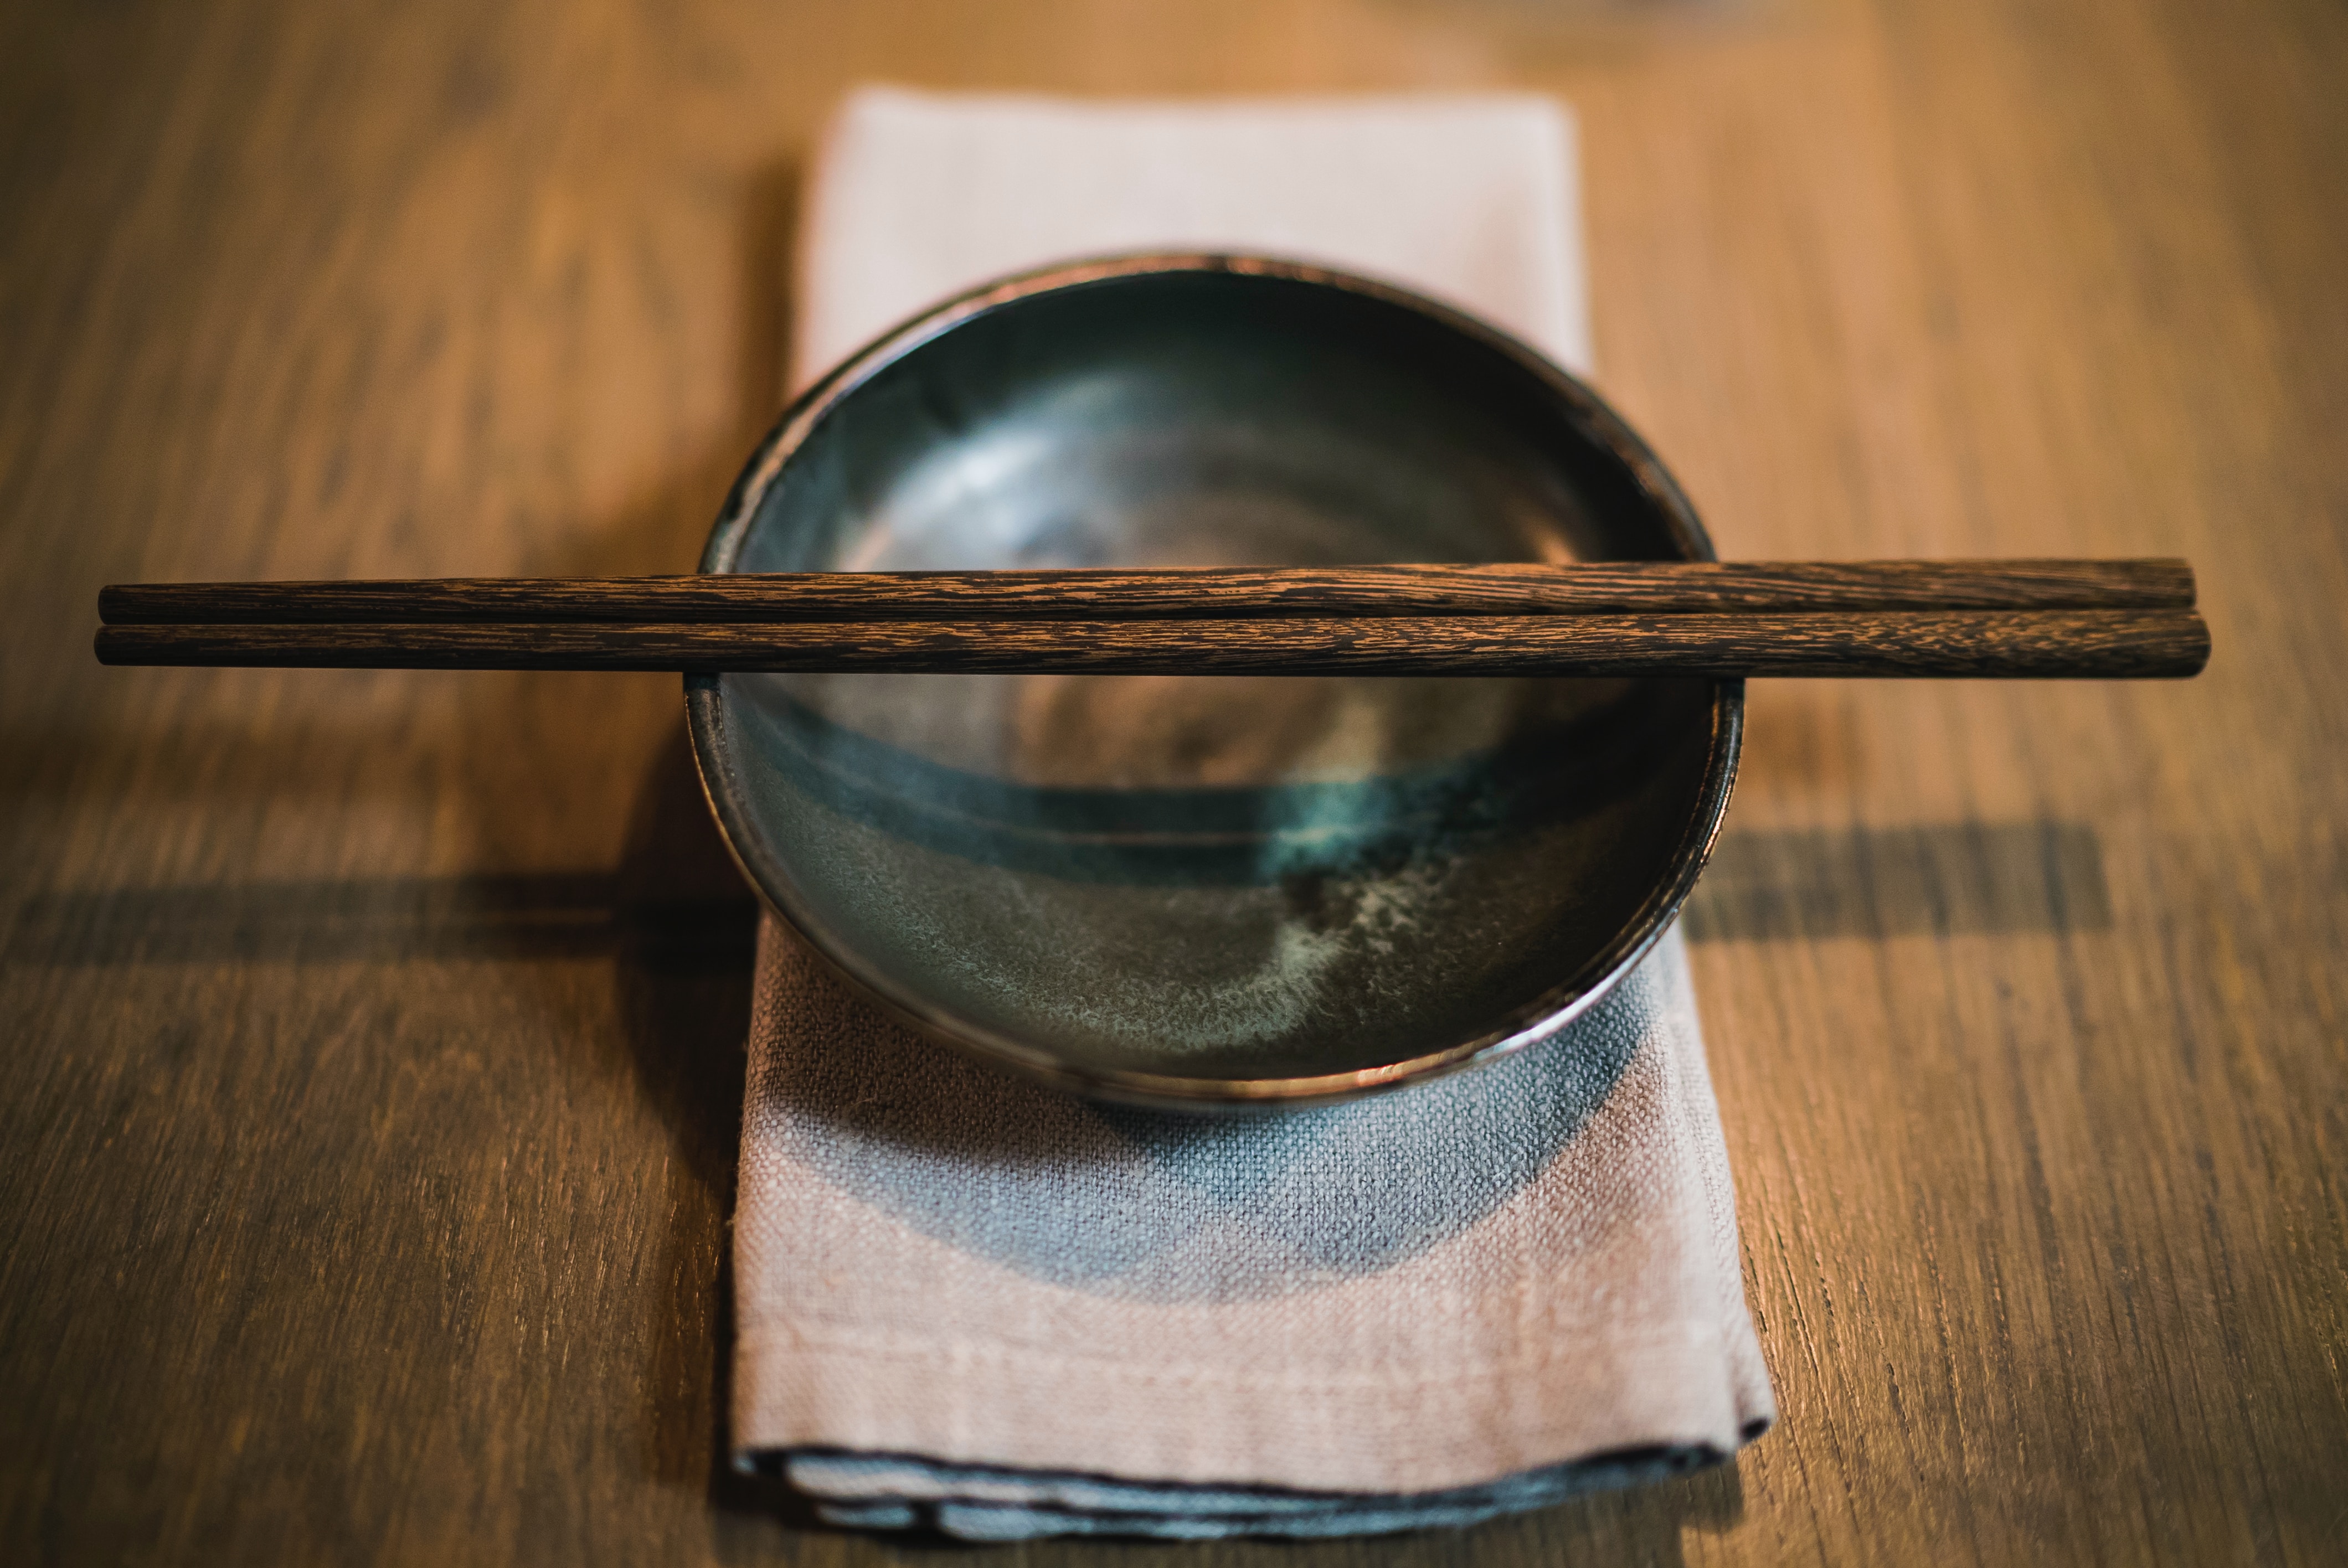 A pair of wooden chopsticks lain across a dark plate, ready to be used